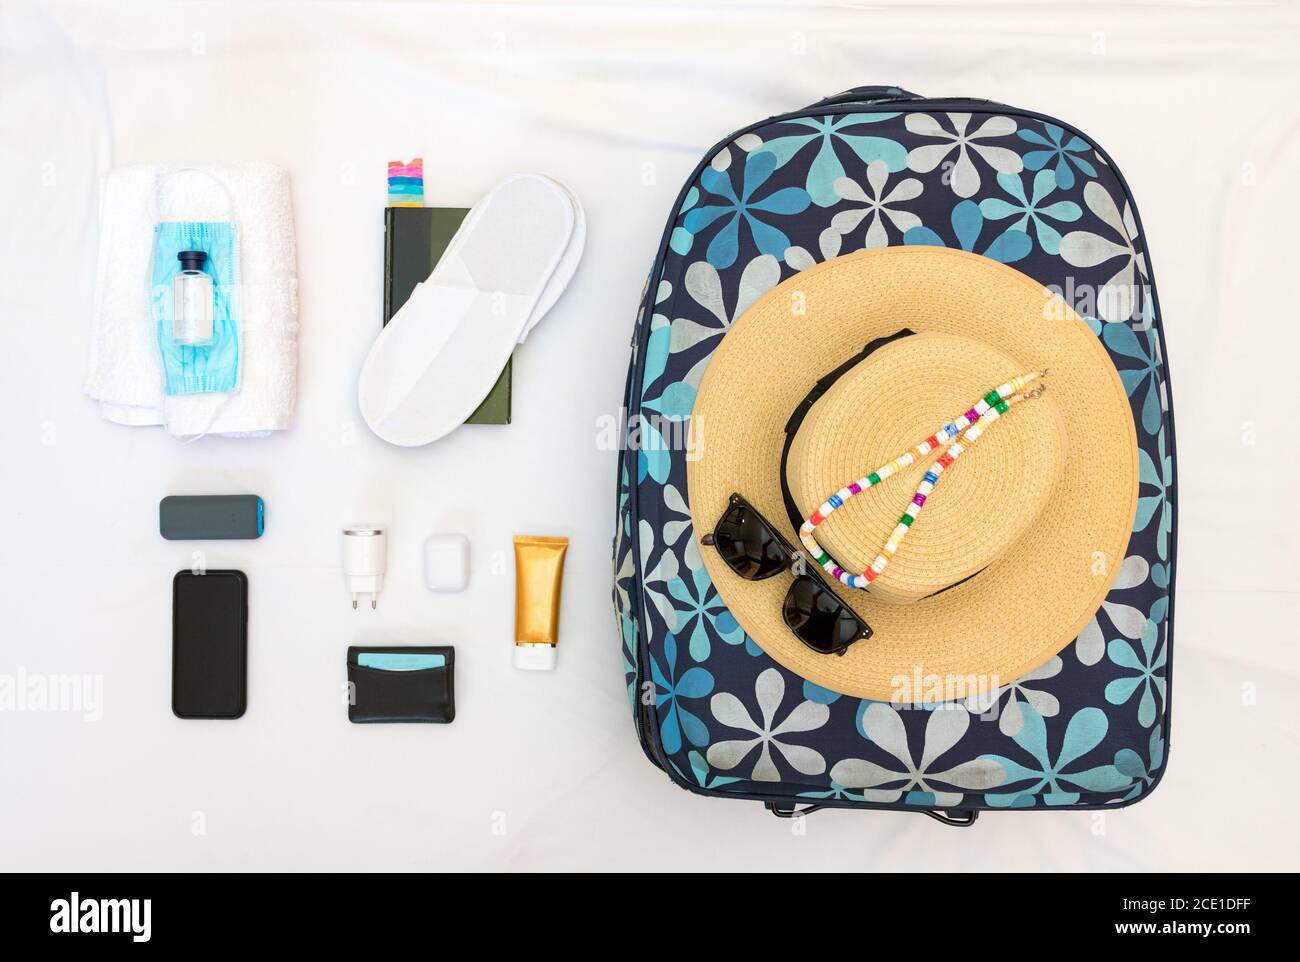 Knolling women travel set with mask, hand sanitiser, straw hat, sunglasses and accessories. Stock Photo